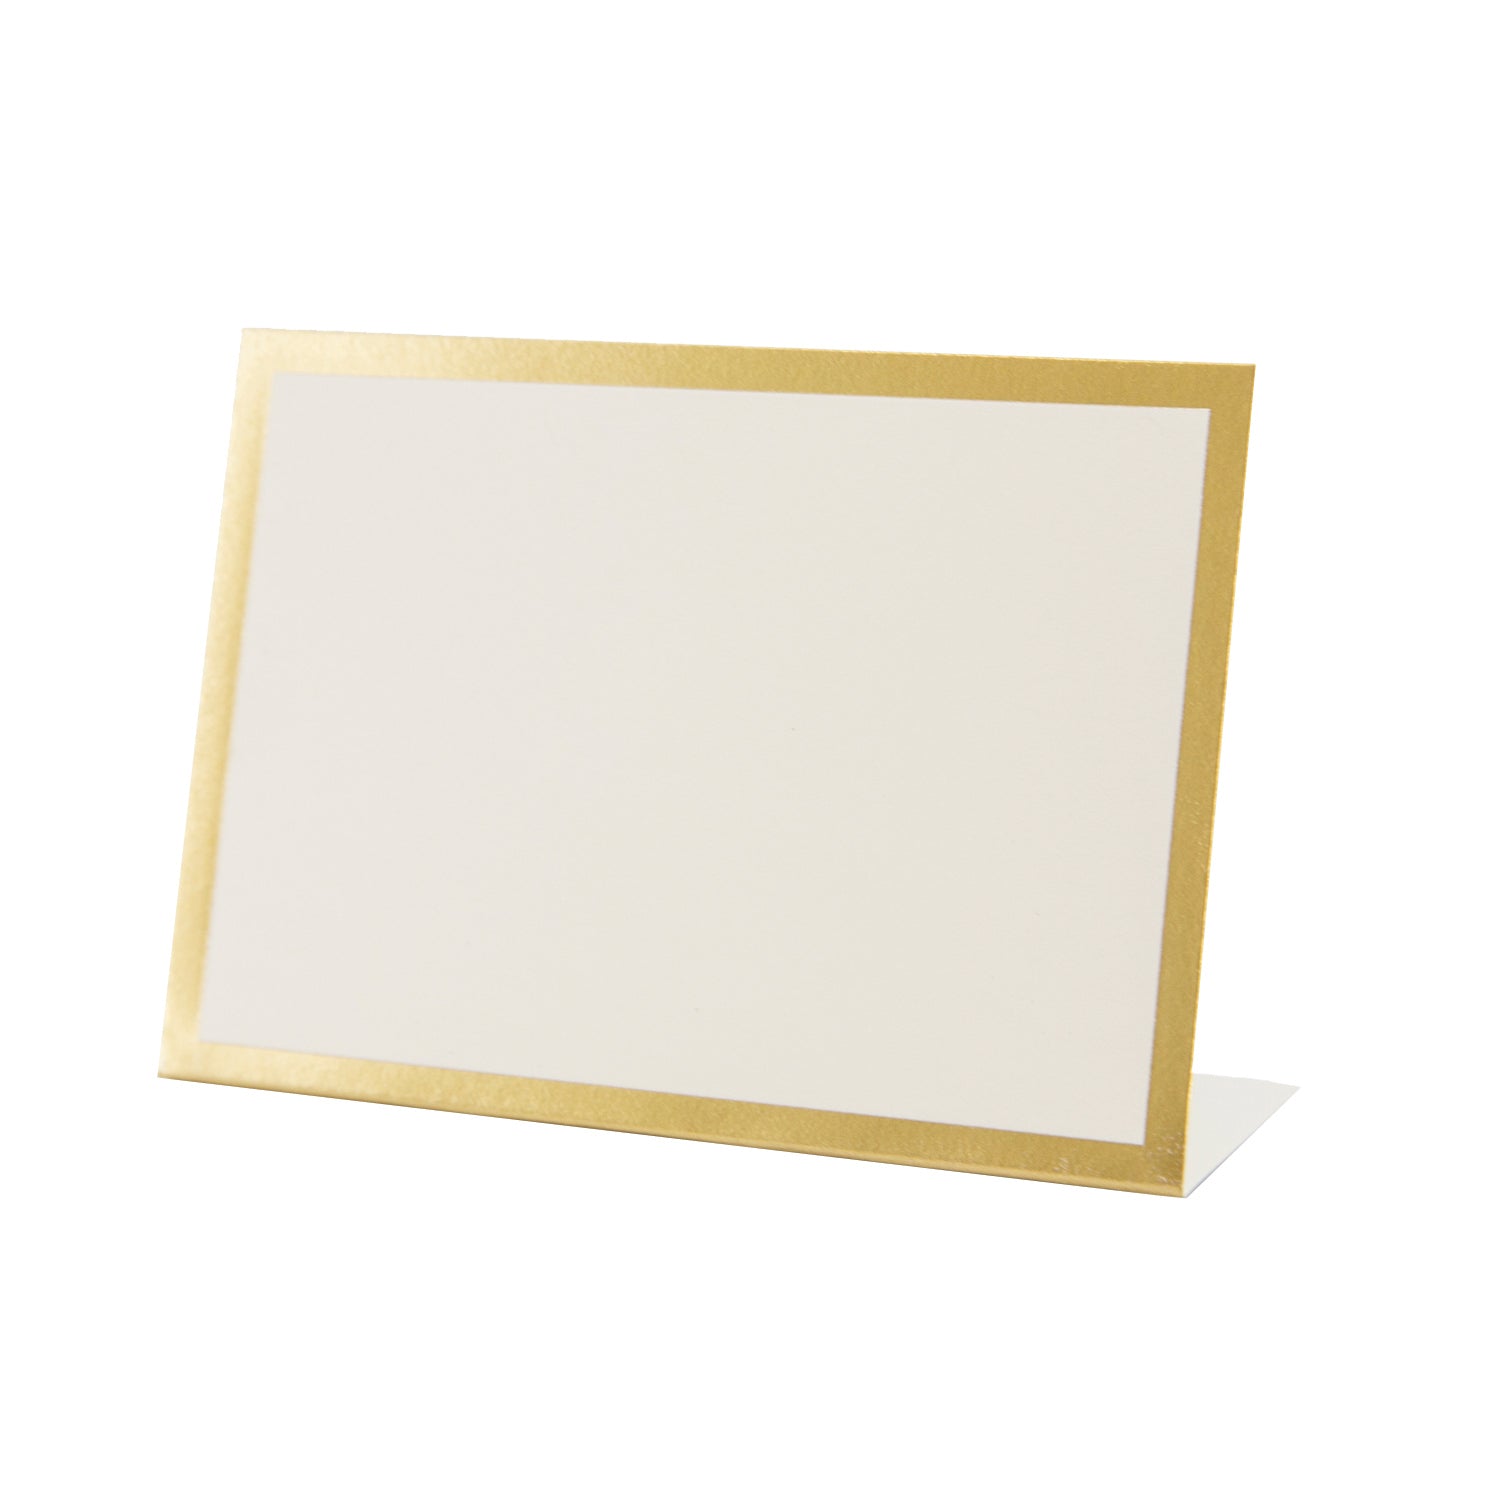 A Hester &amp; Cook Gold Foil Frame Place Card labeled for guests on a white background.